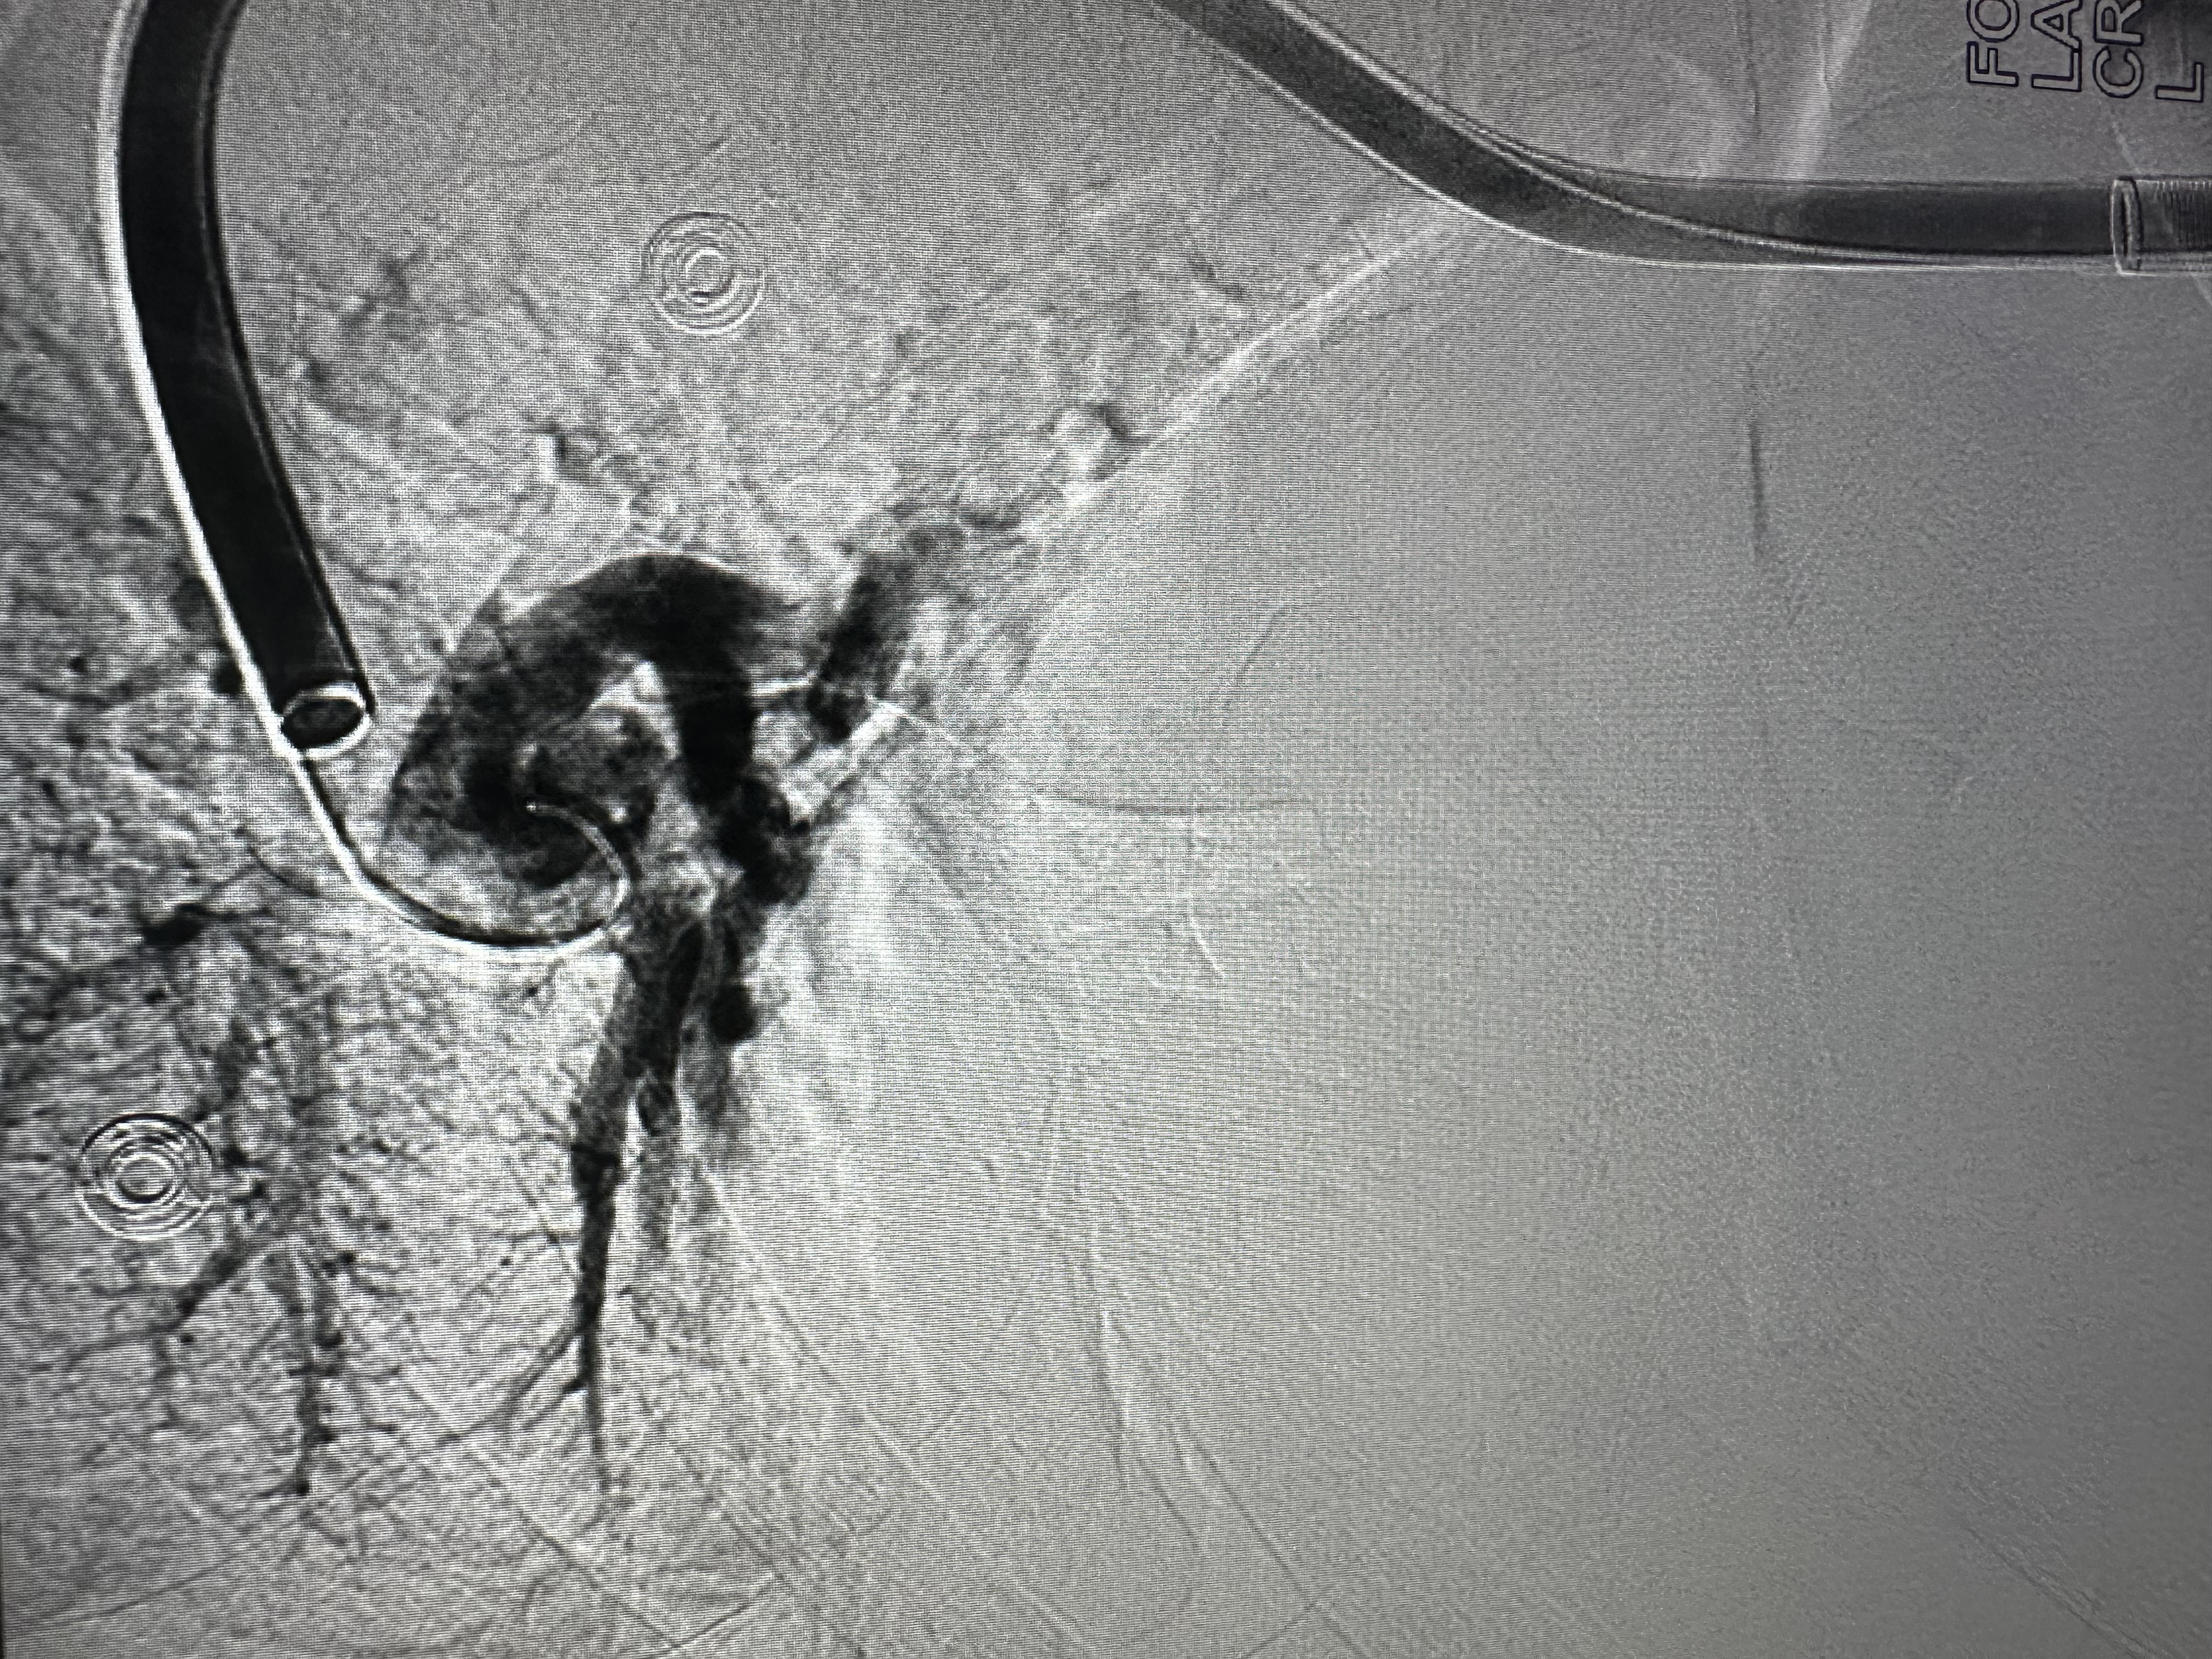 Treatment of massive pulmonary embolism with percutaneous mechanical thrombectomy